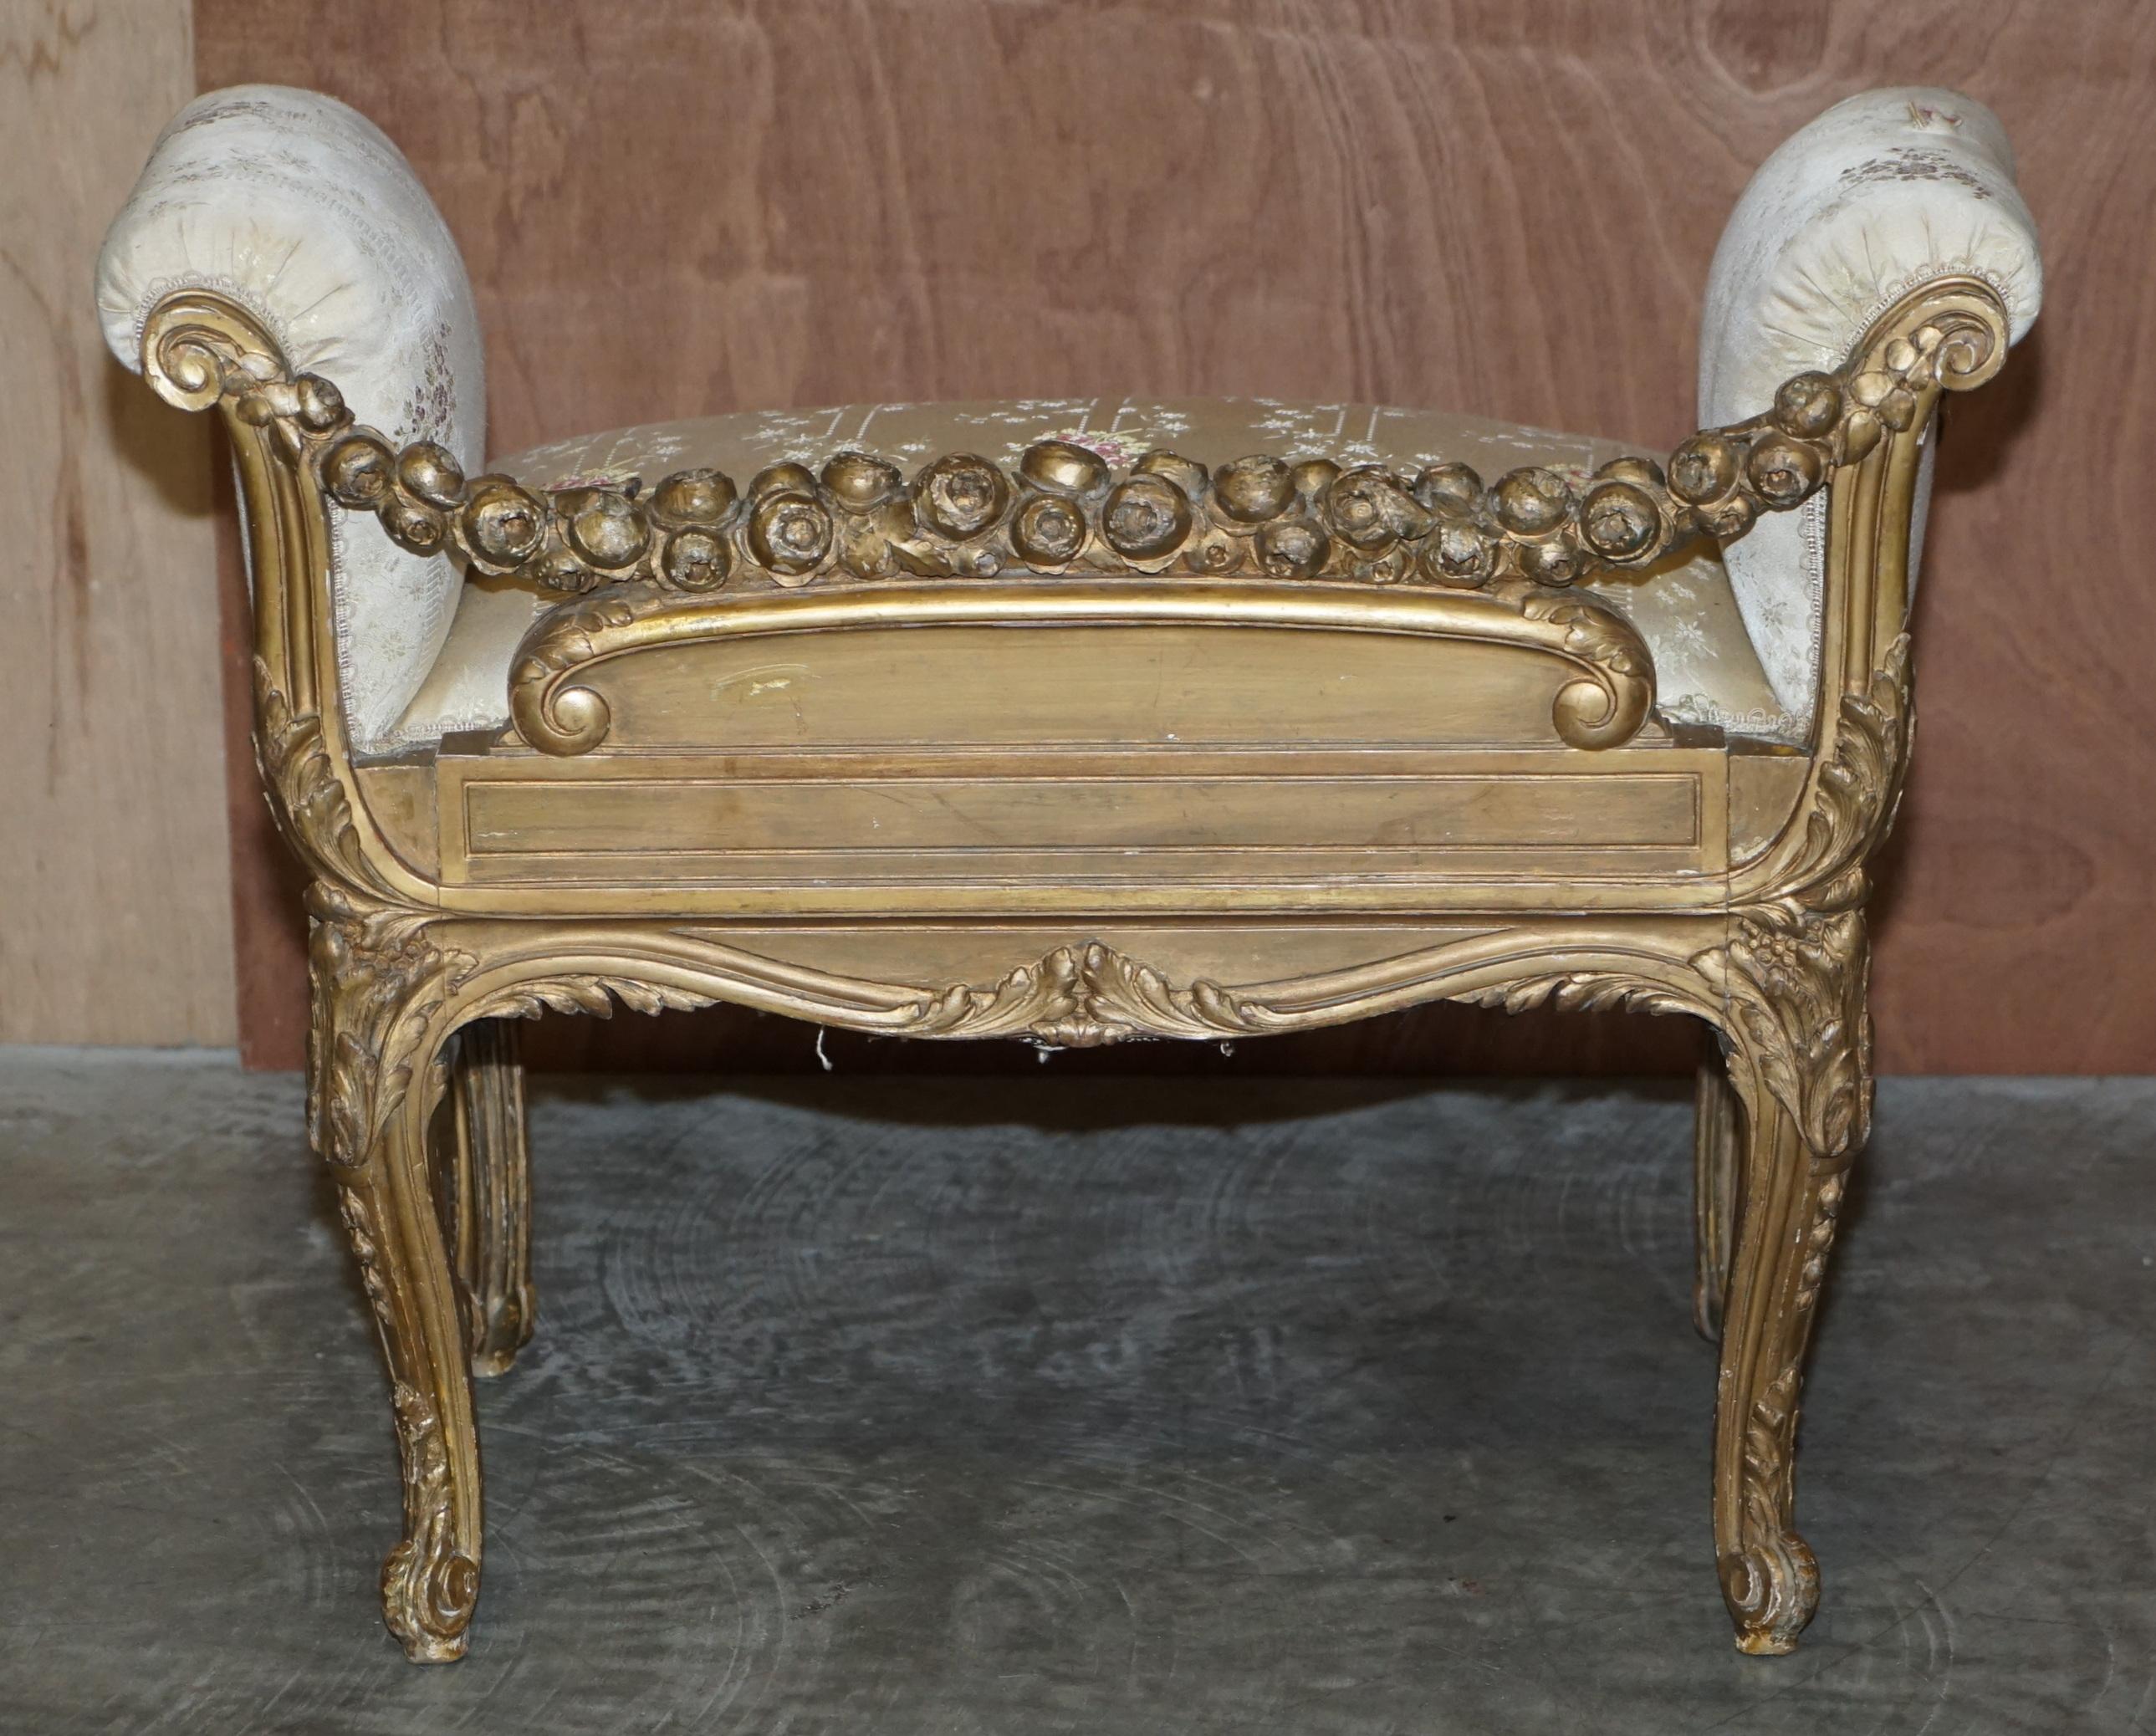 Stunning Antique circa 1840 French Hand Carved Giltwood Window Bench Stool Seat 10